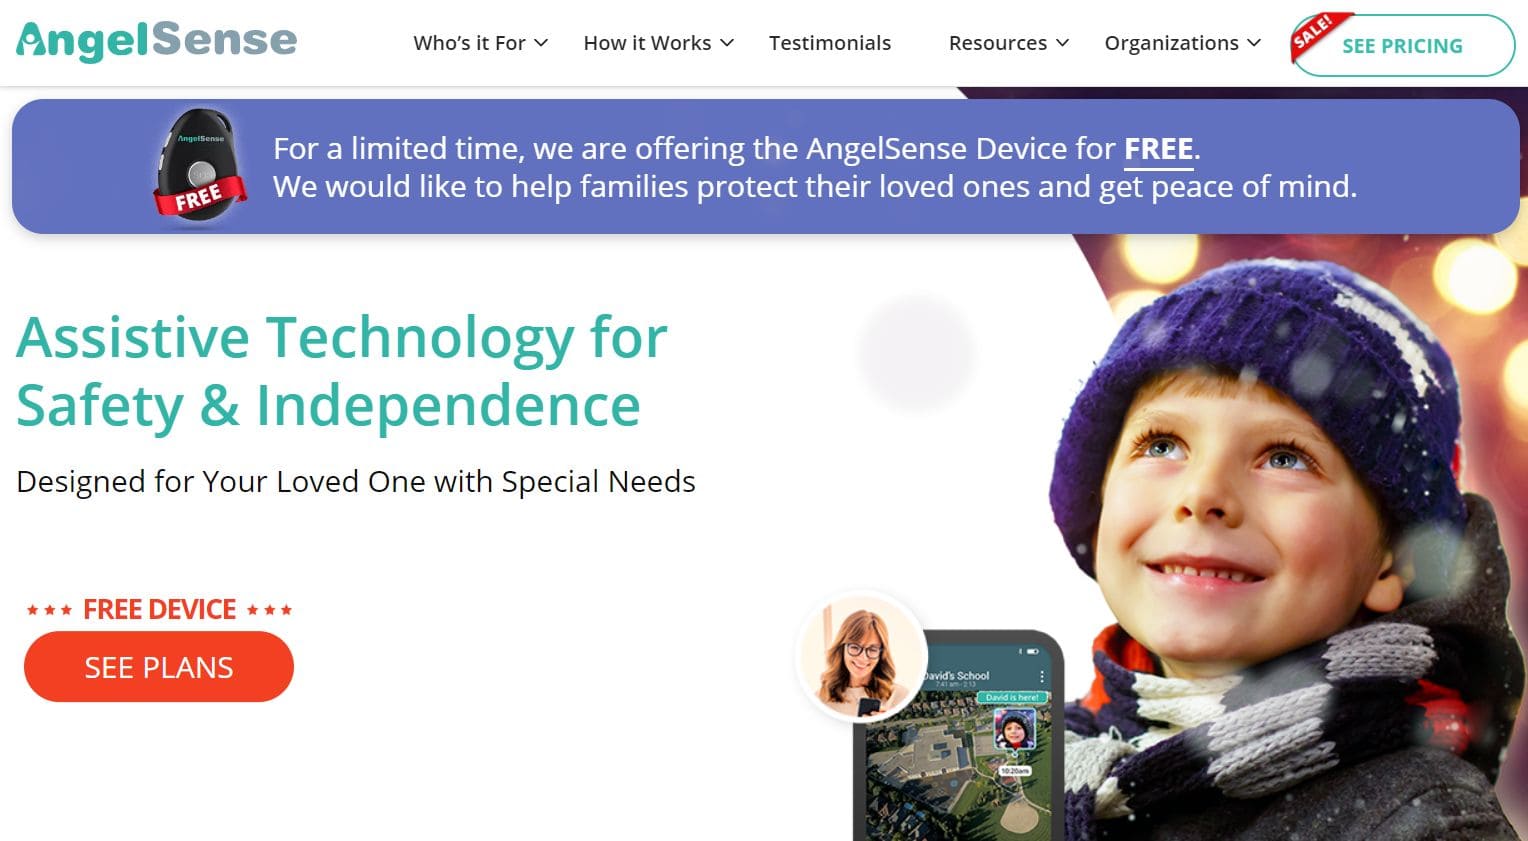 View of the website's home page for information on assistive technology for people with autism